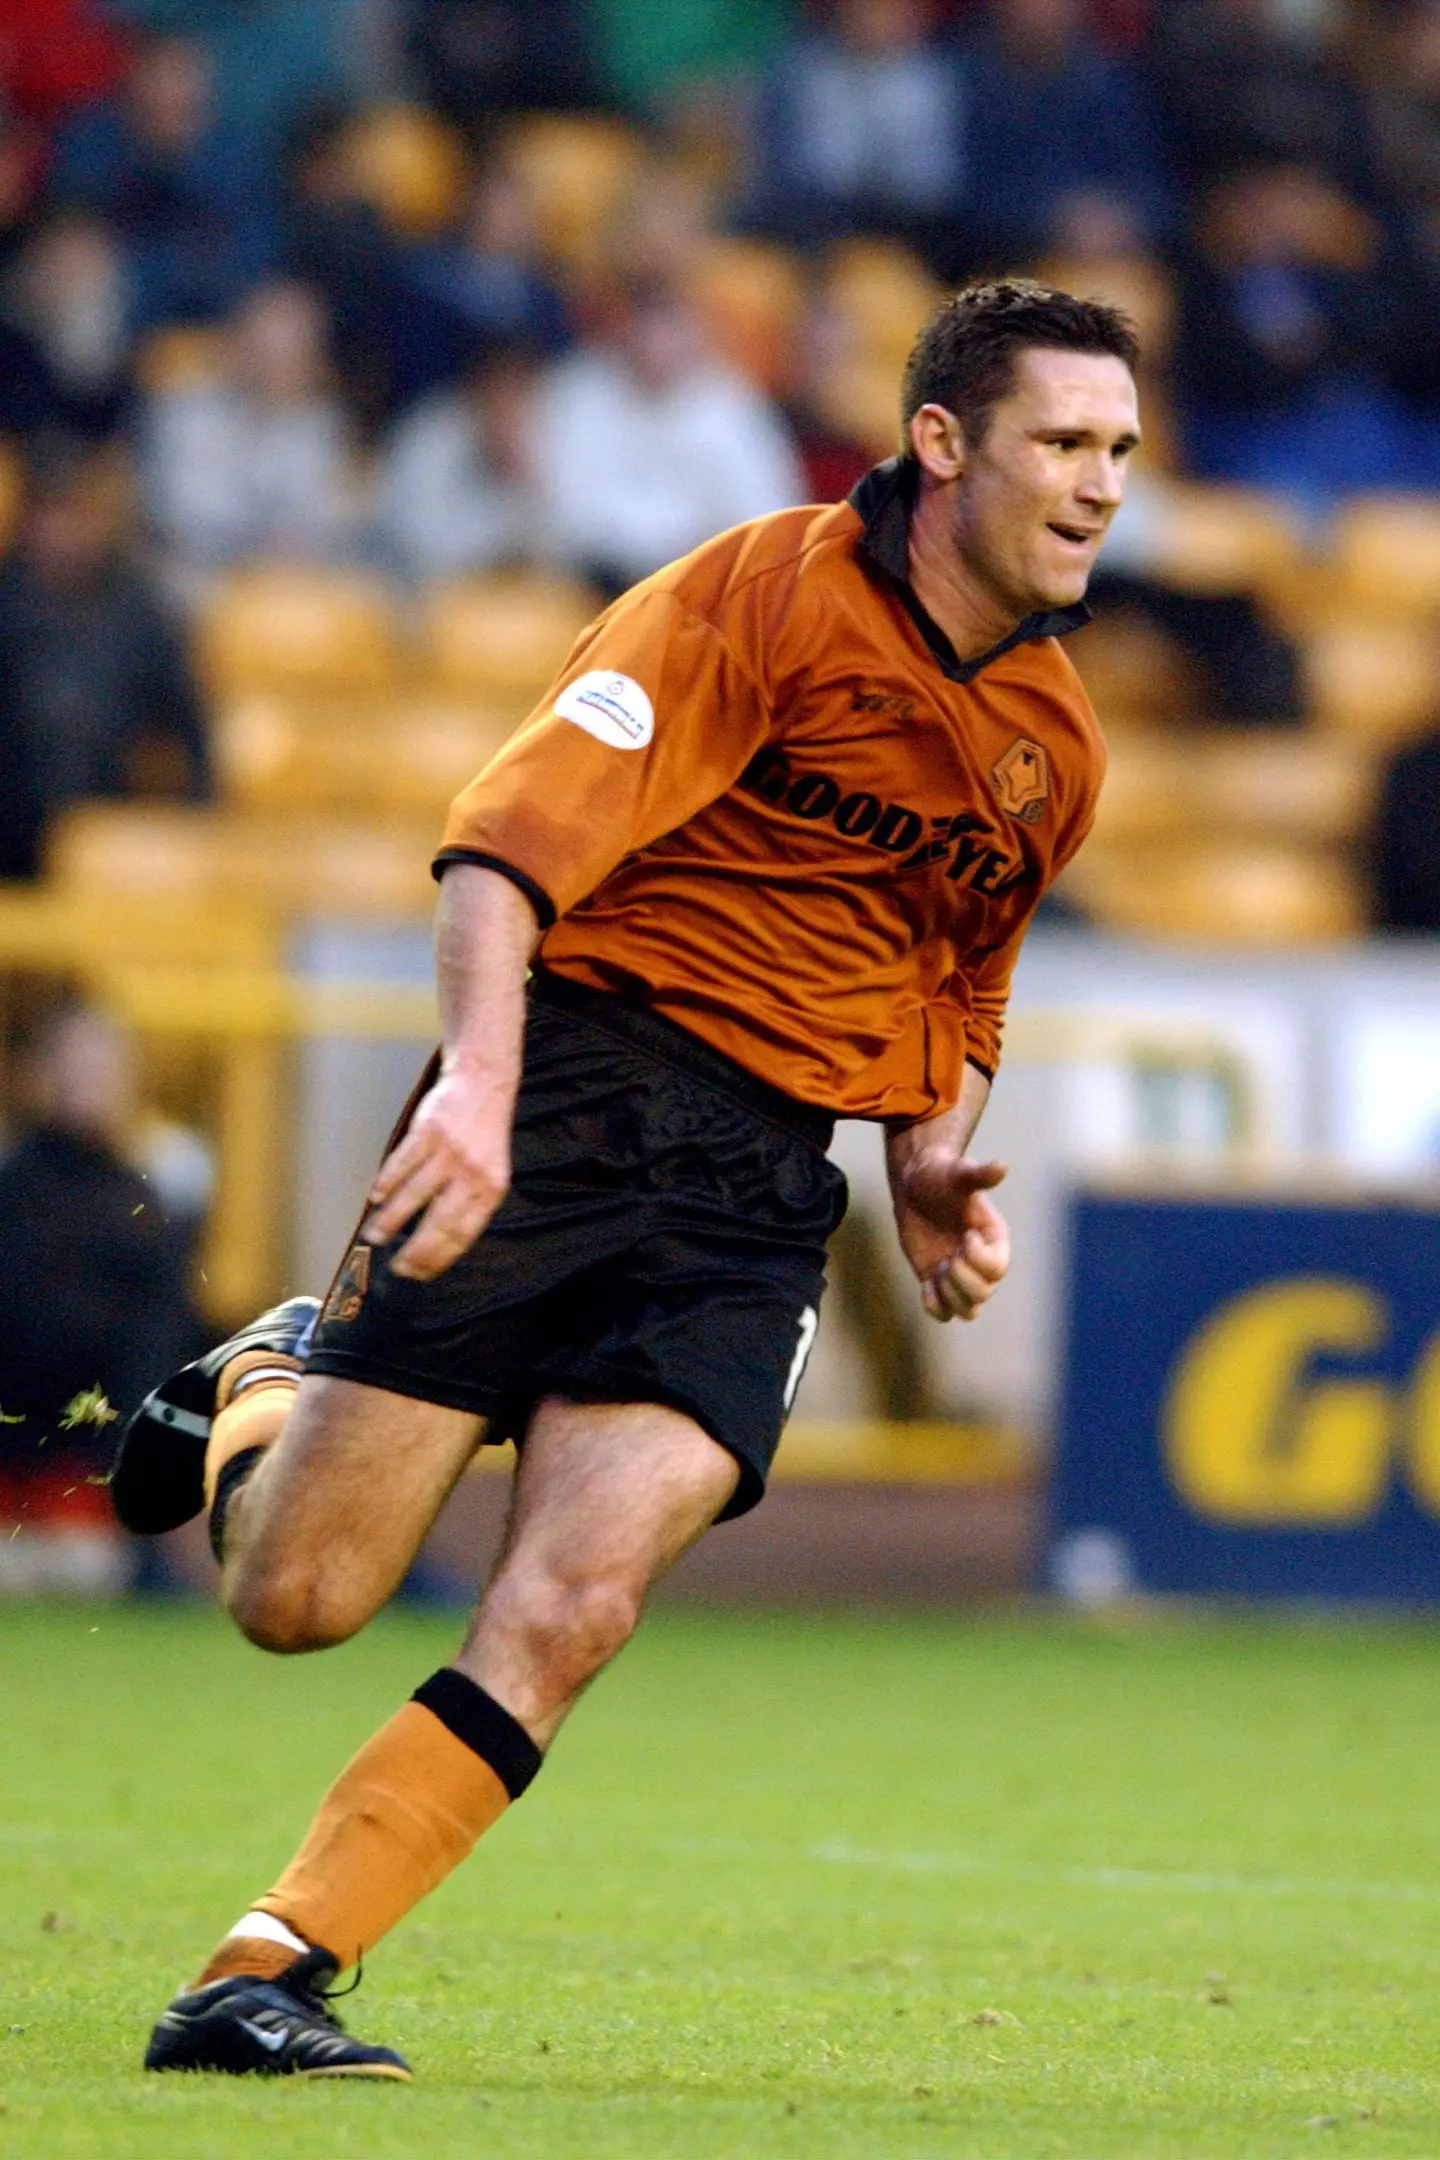 Cedric Roussel represented Wolves in Division One from 2001-2002.